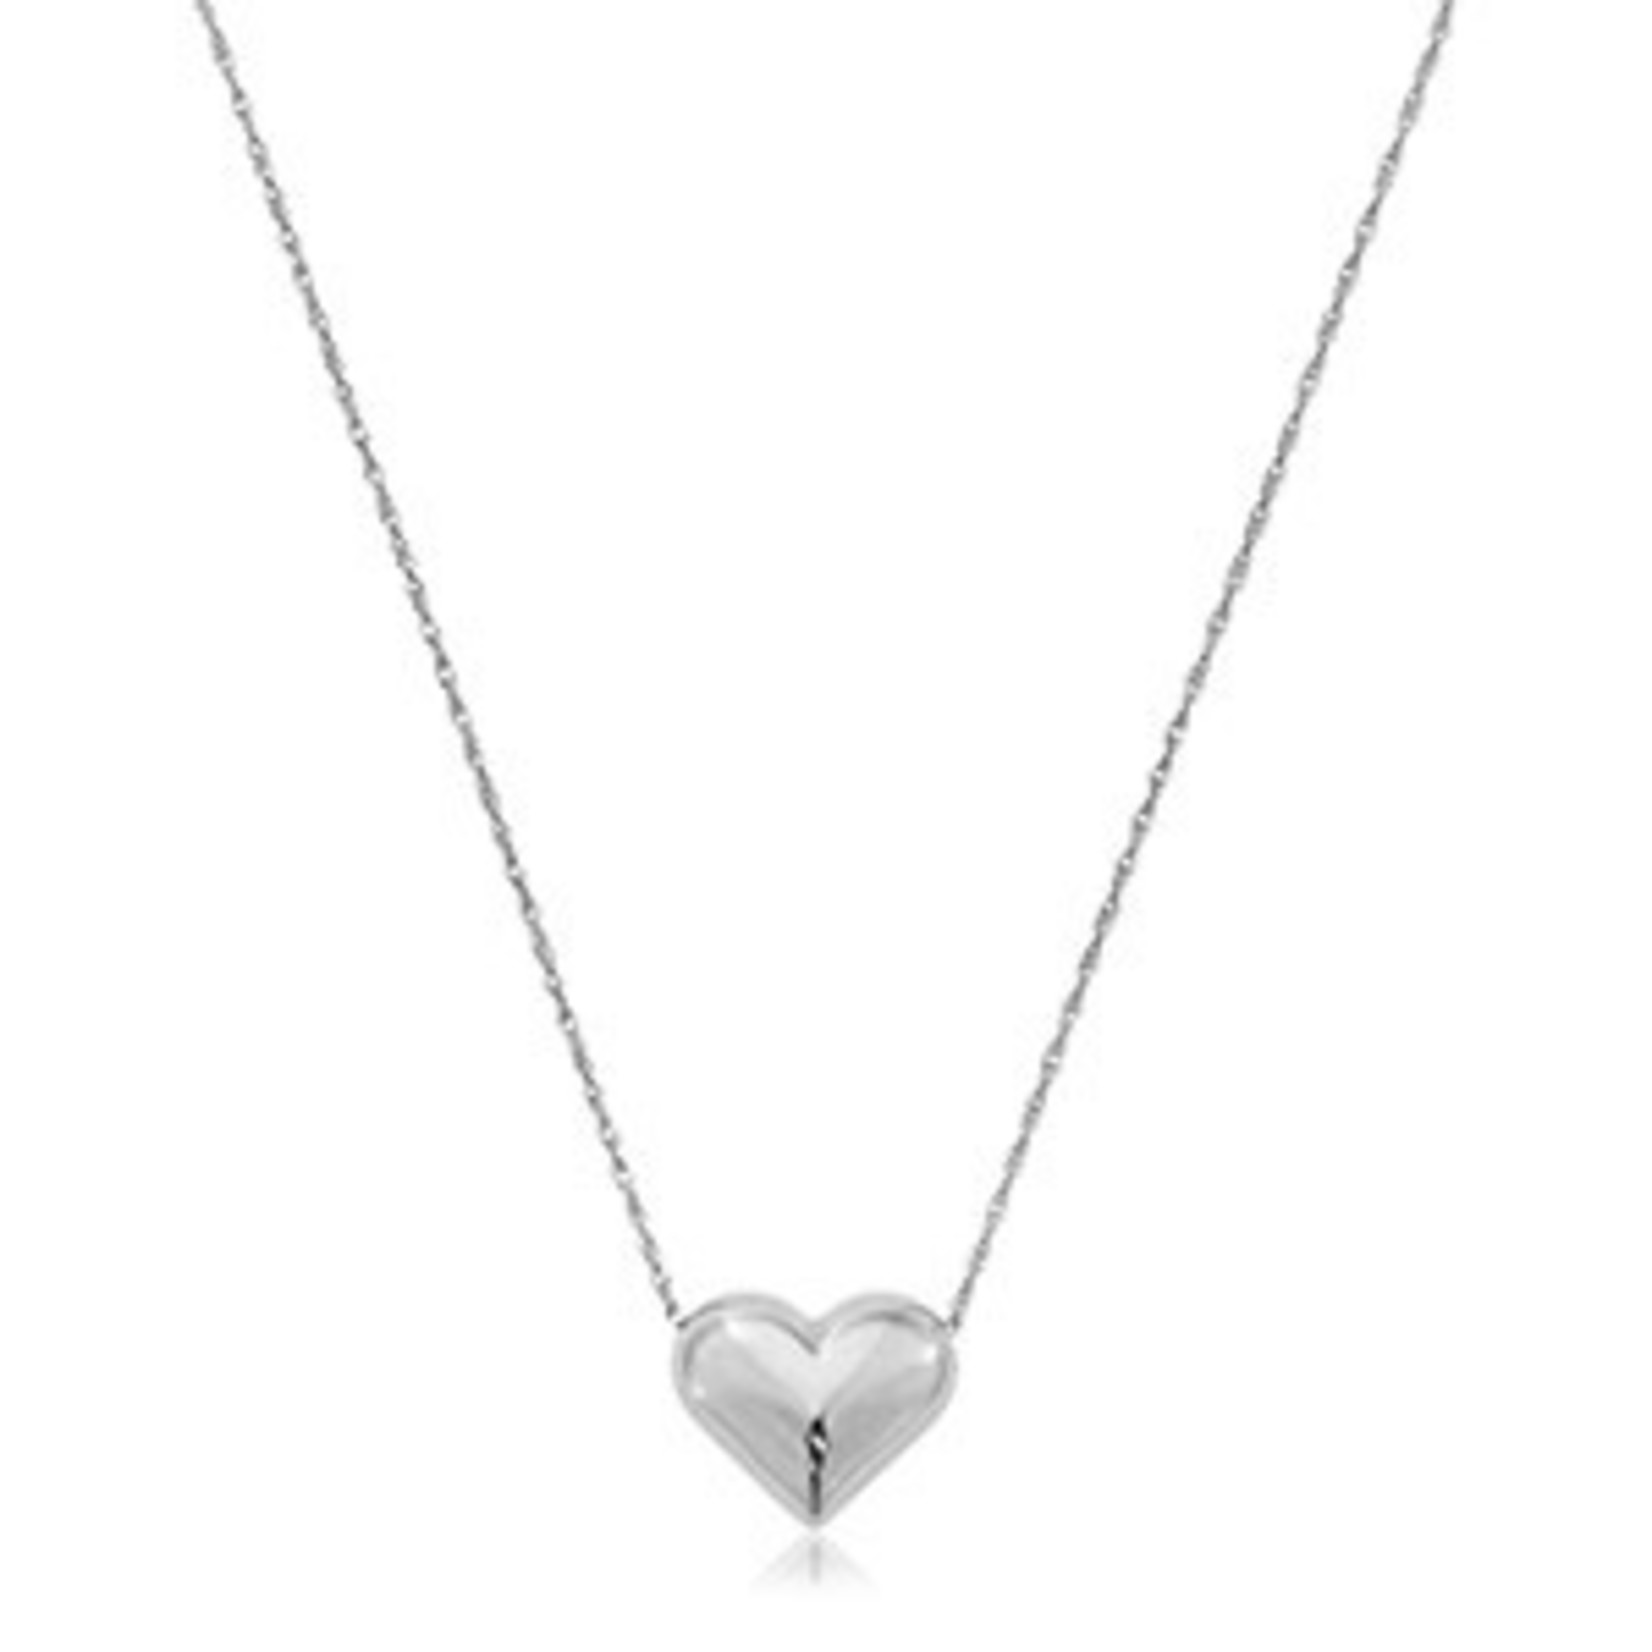 Sterling Silver Puffed Heart Necklace 18"